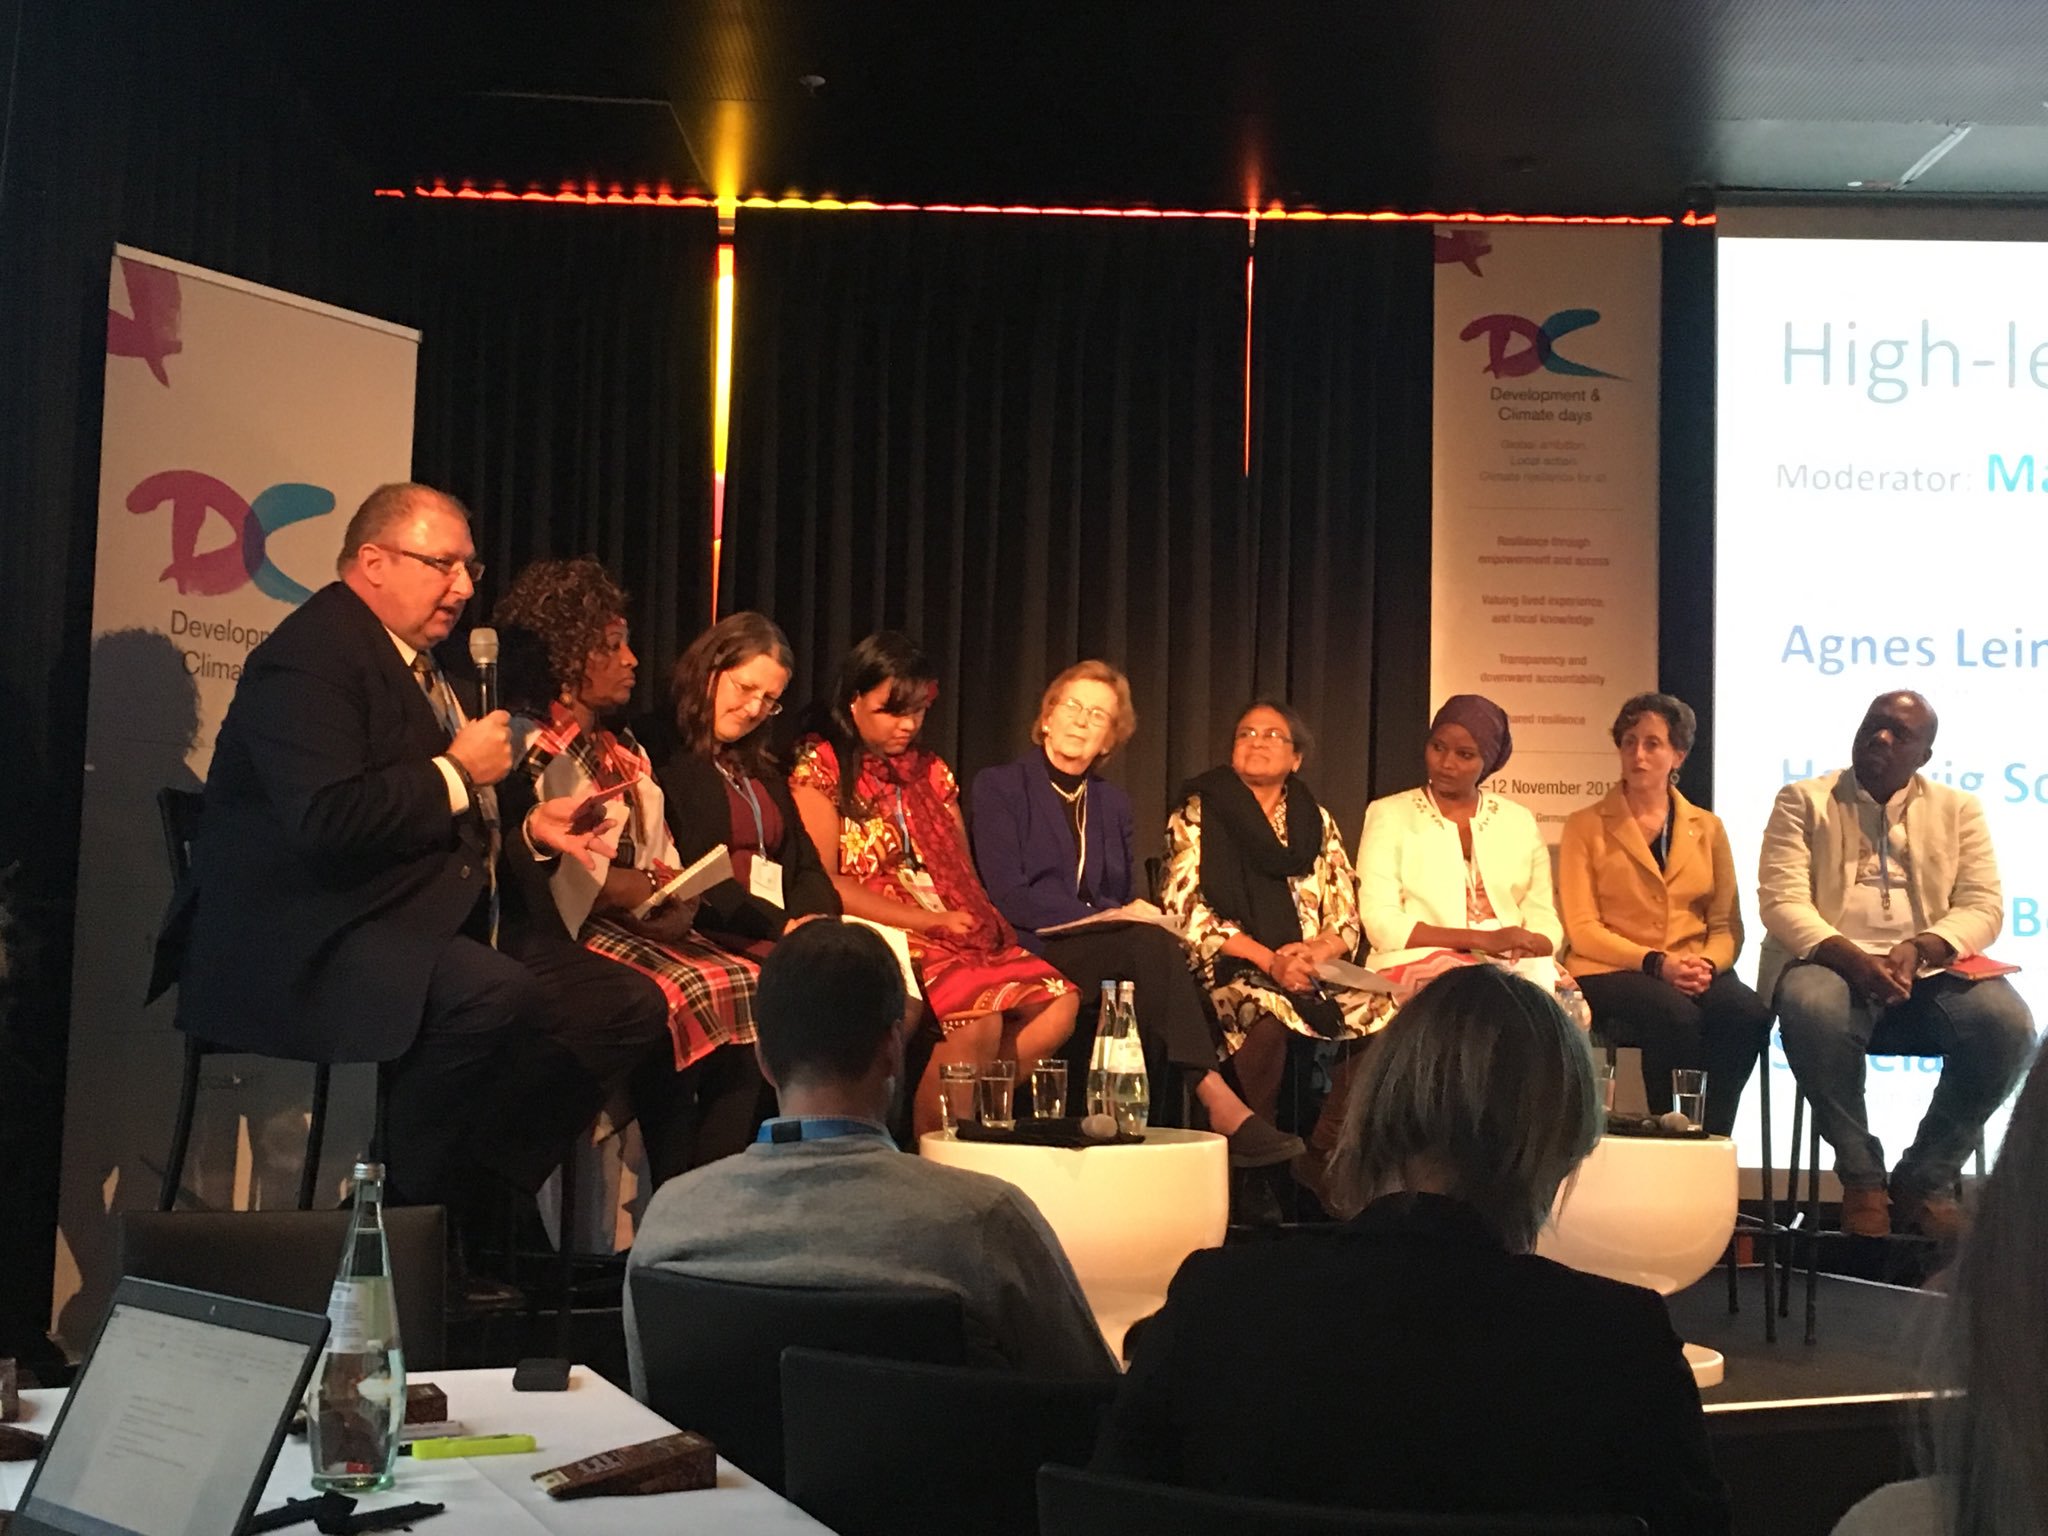 All @WorldBank investments now must have community engagement, when women involved in governance, results are better #DCdays17  #cop23 https://t.co/4r2sP8aqBY